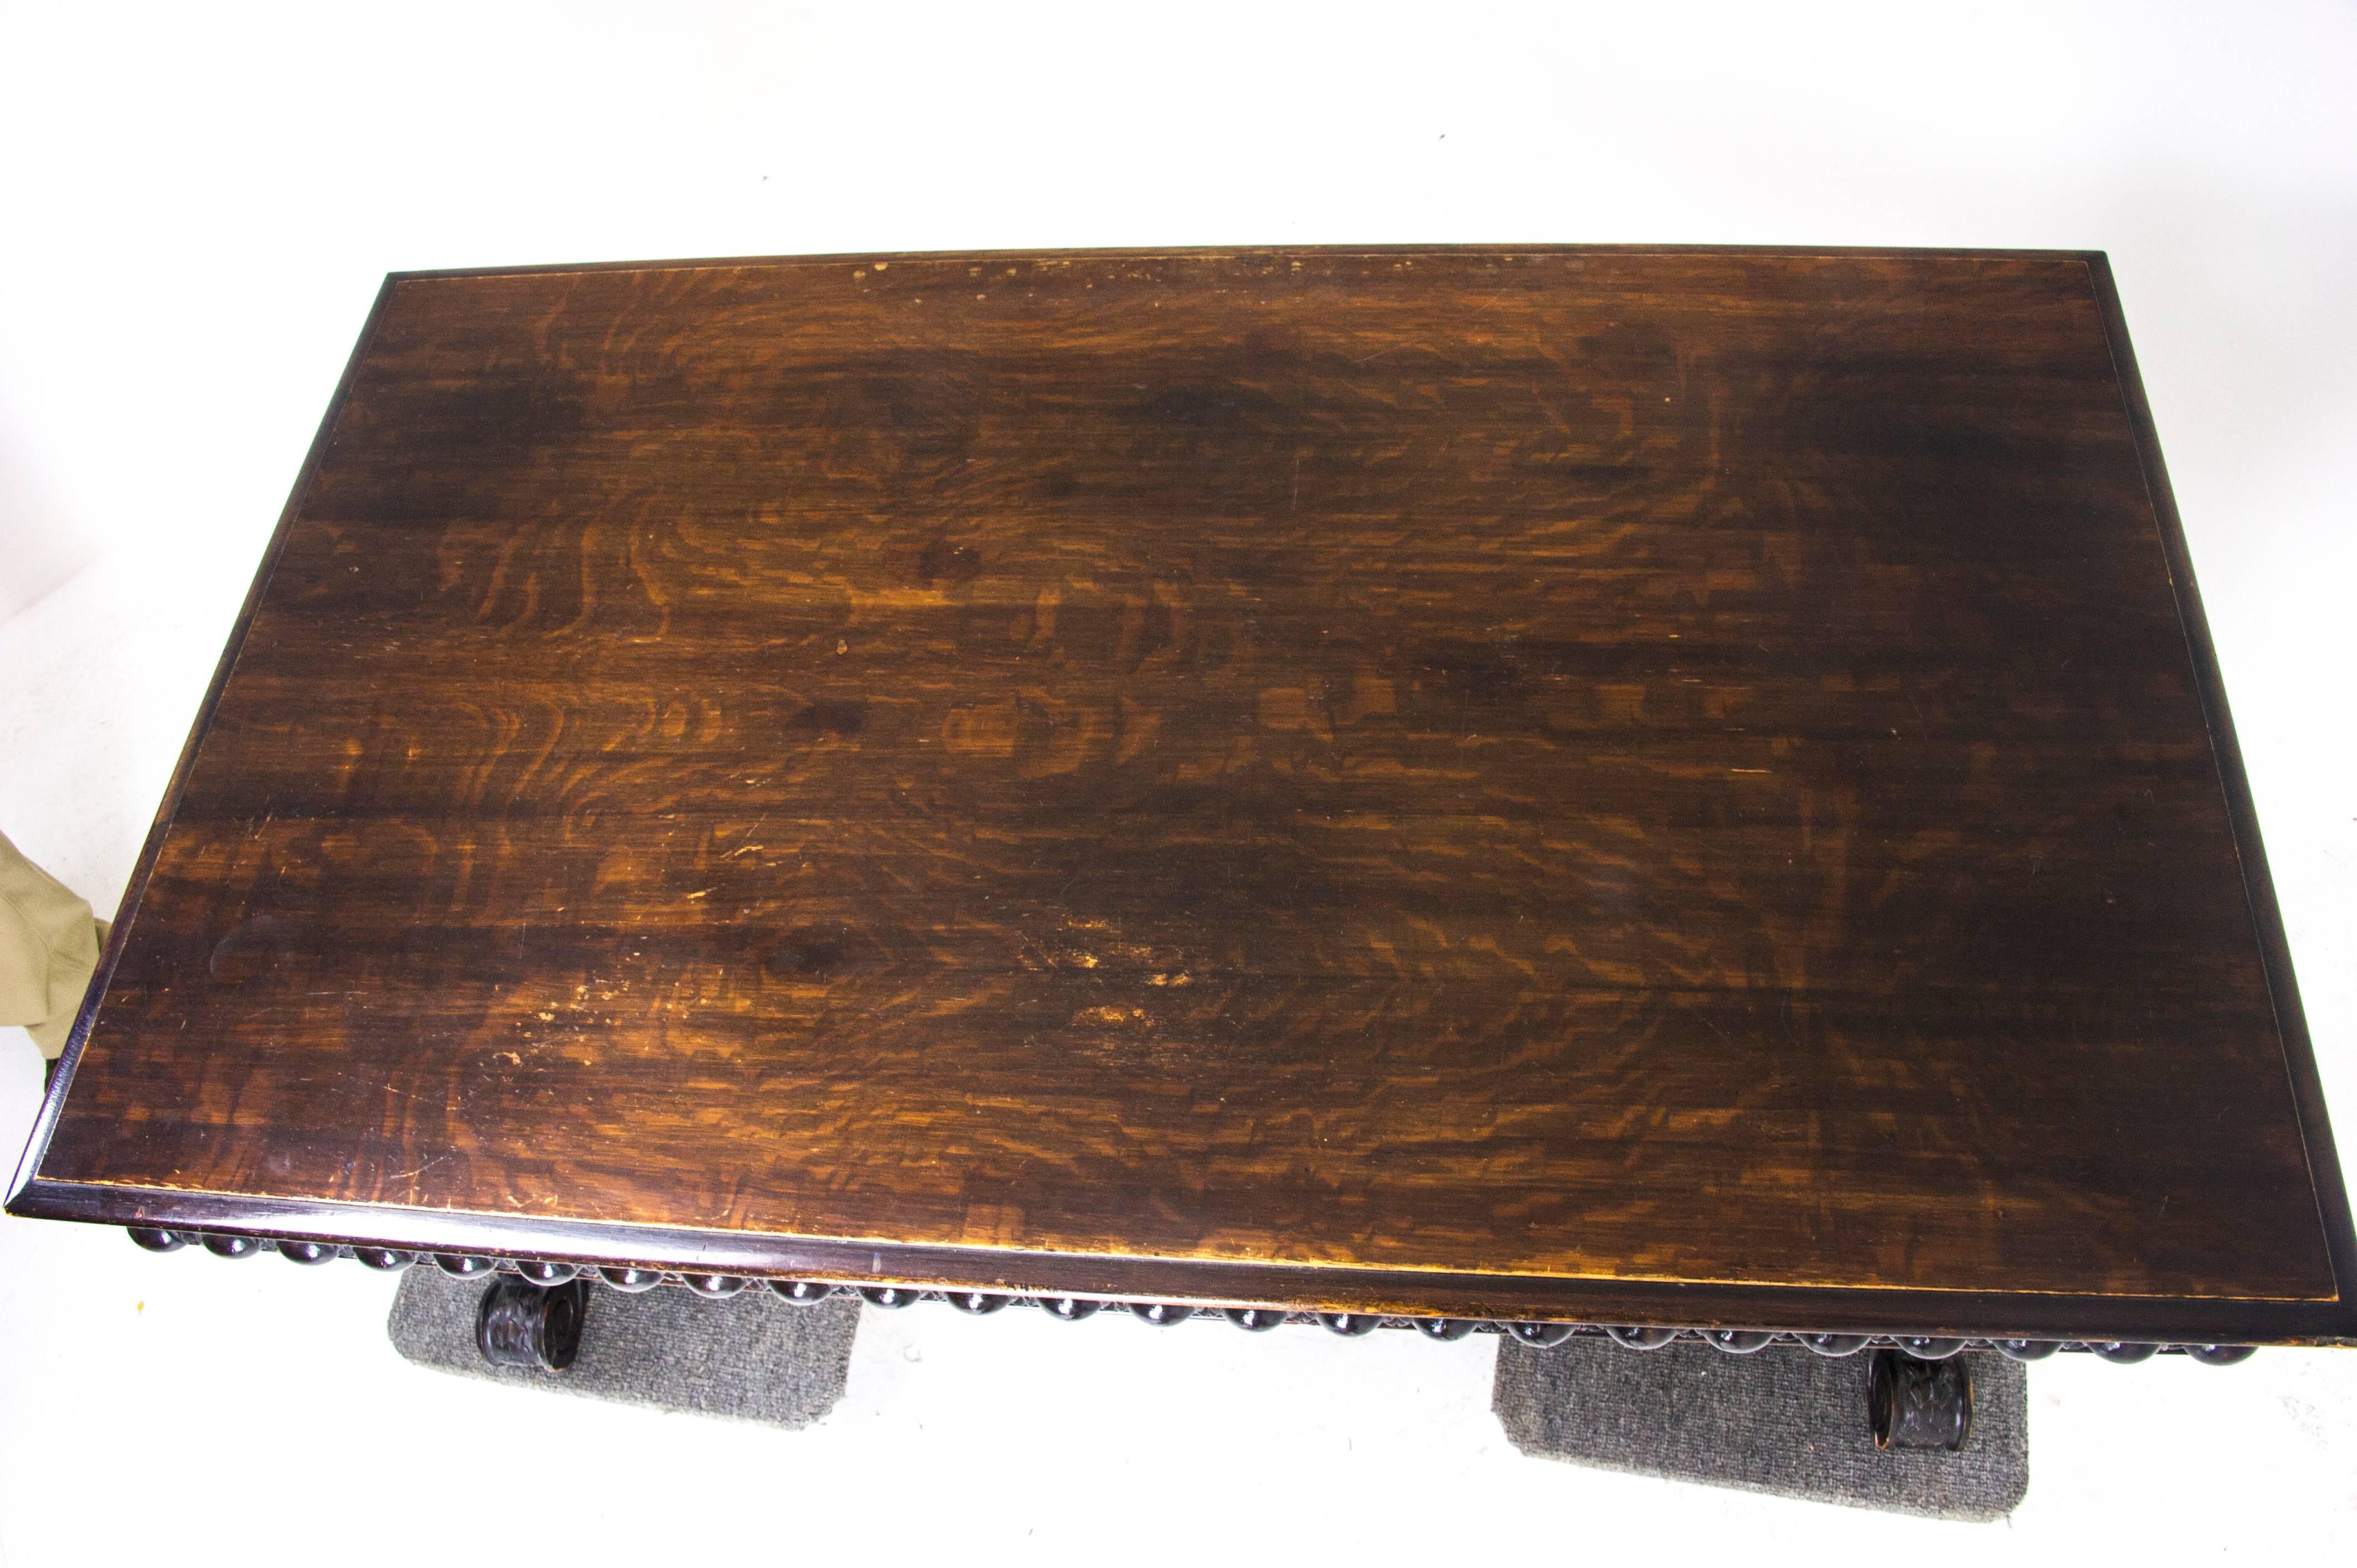 Scotland, 1880
Solid Tiger Oak Construction
Rectangular Top
Fitted with Three Drawers on Both Sides
Free Standing
Wonderful Carved Supports
United by a Heavily Carved Stretcher
Excellent quality and Condition
Extremely Heavy

$3250

B885
60